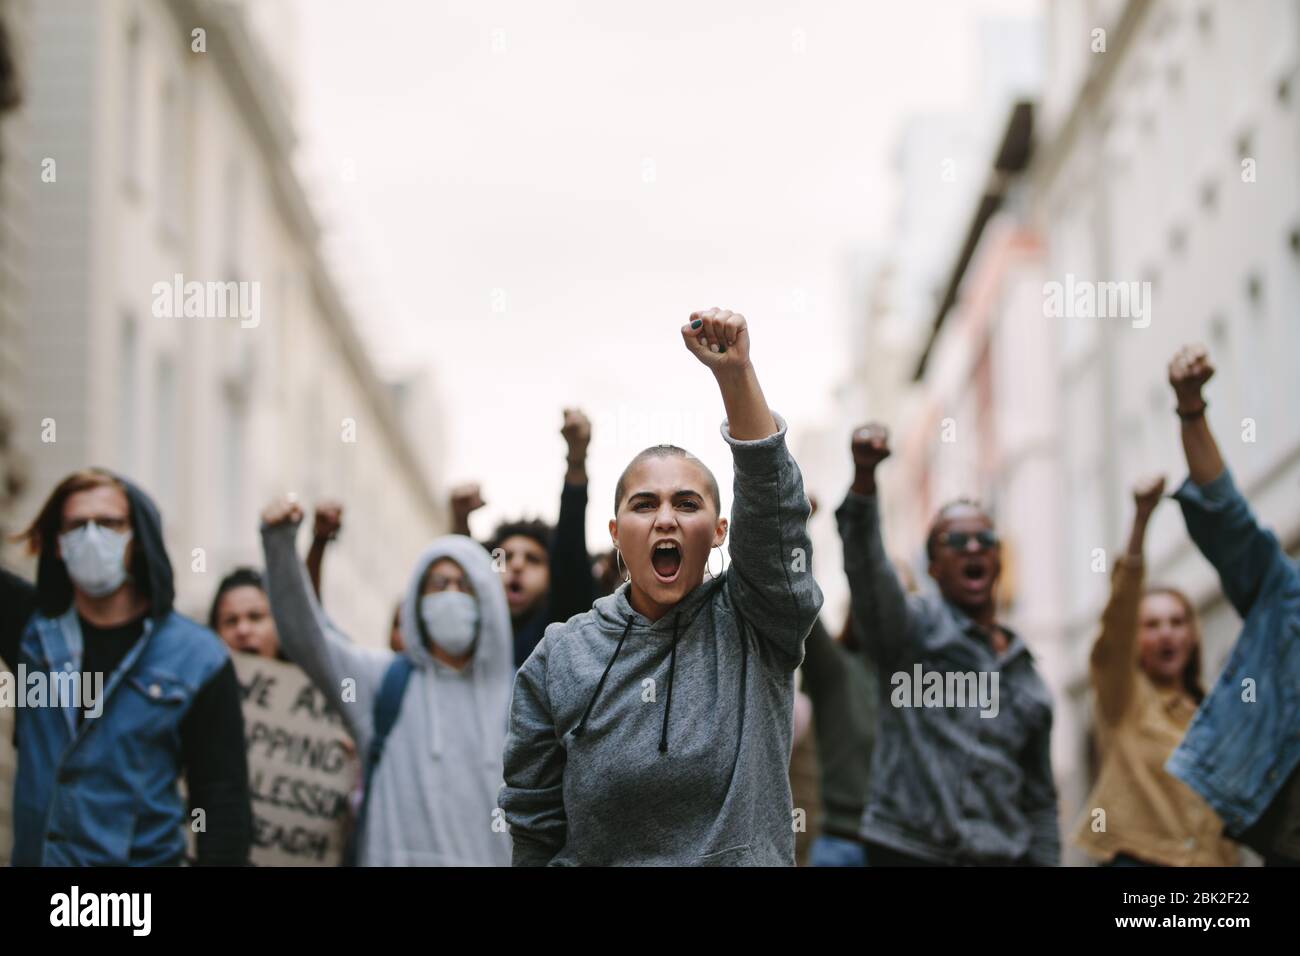 Group of people protesting and giving slogans in a rally. Group of demonstrators protesting in the city. Stock Photo